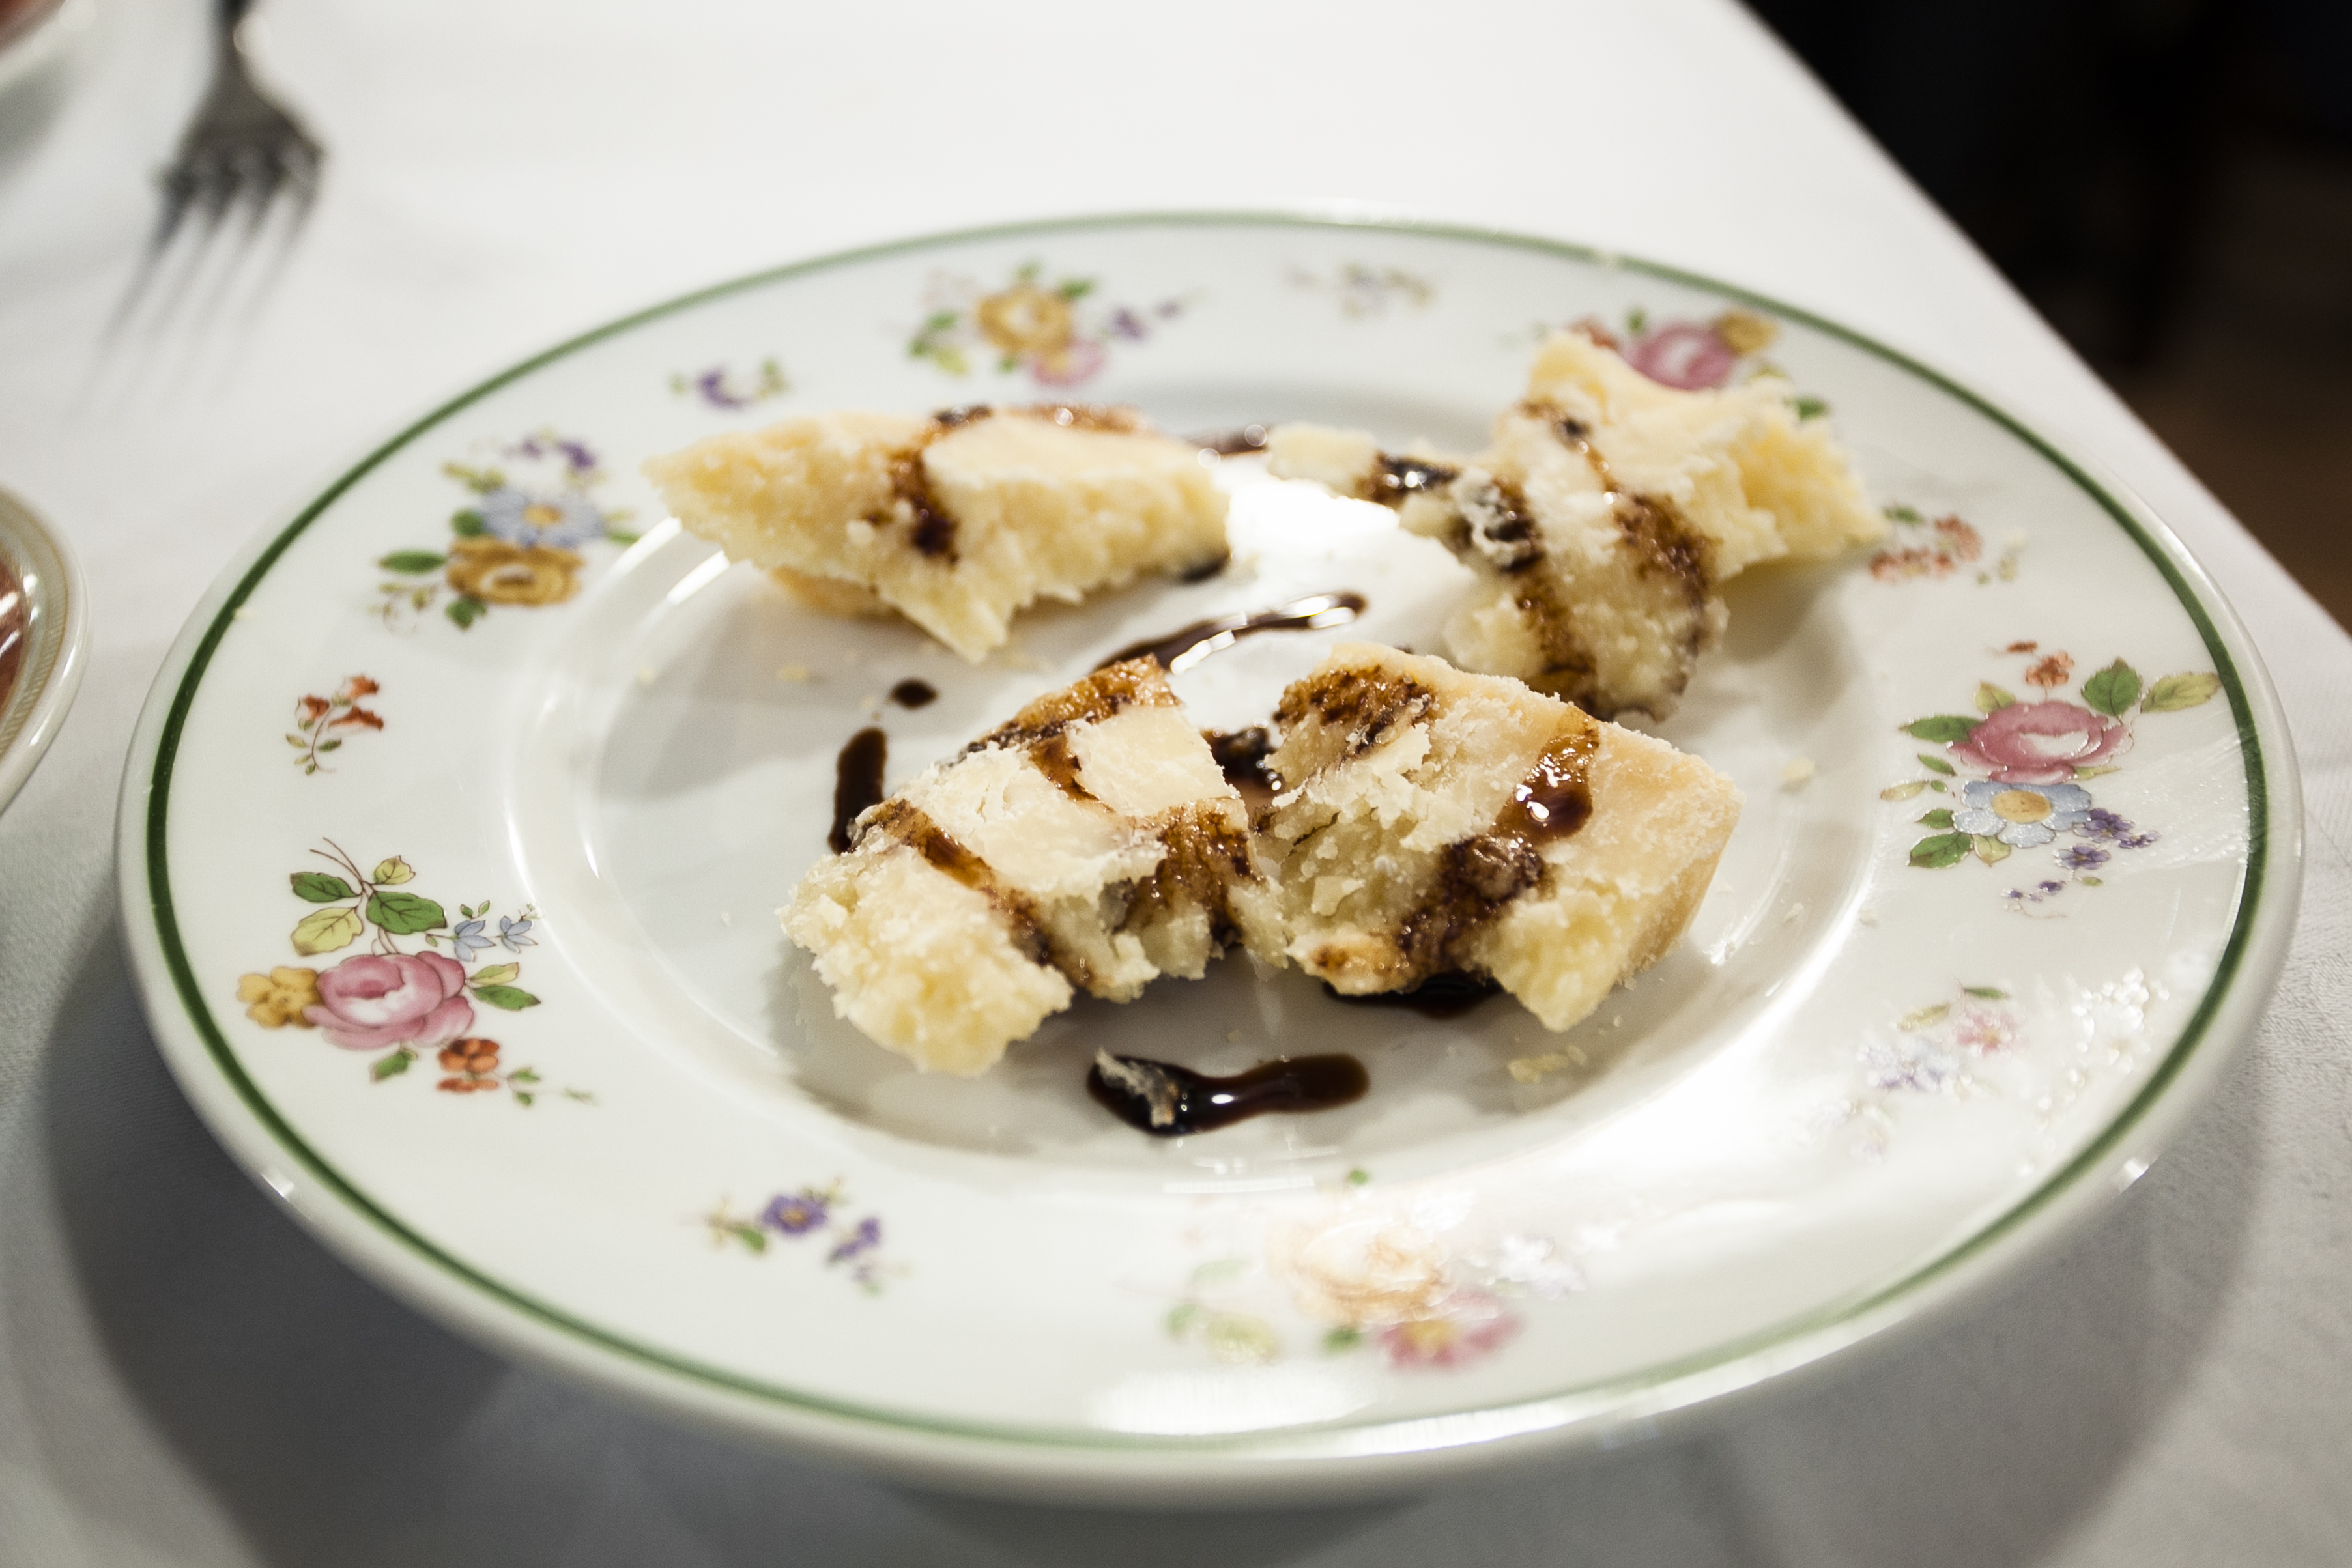 plate of parmigiano reggiano cheese and balsamic vinegar